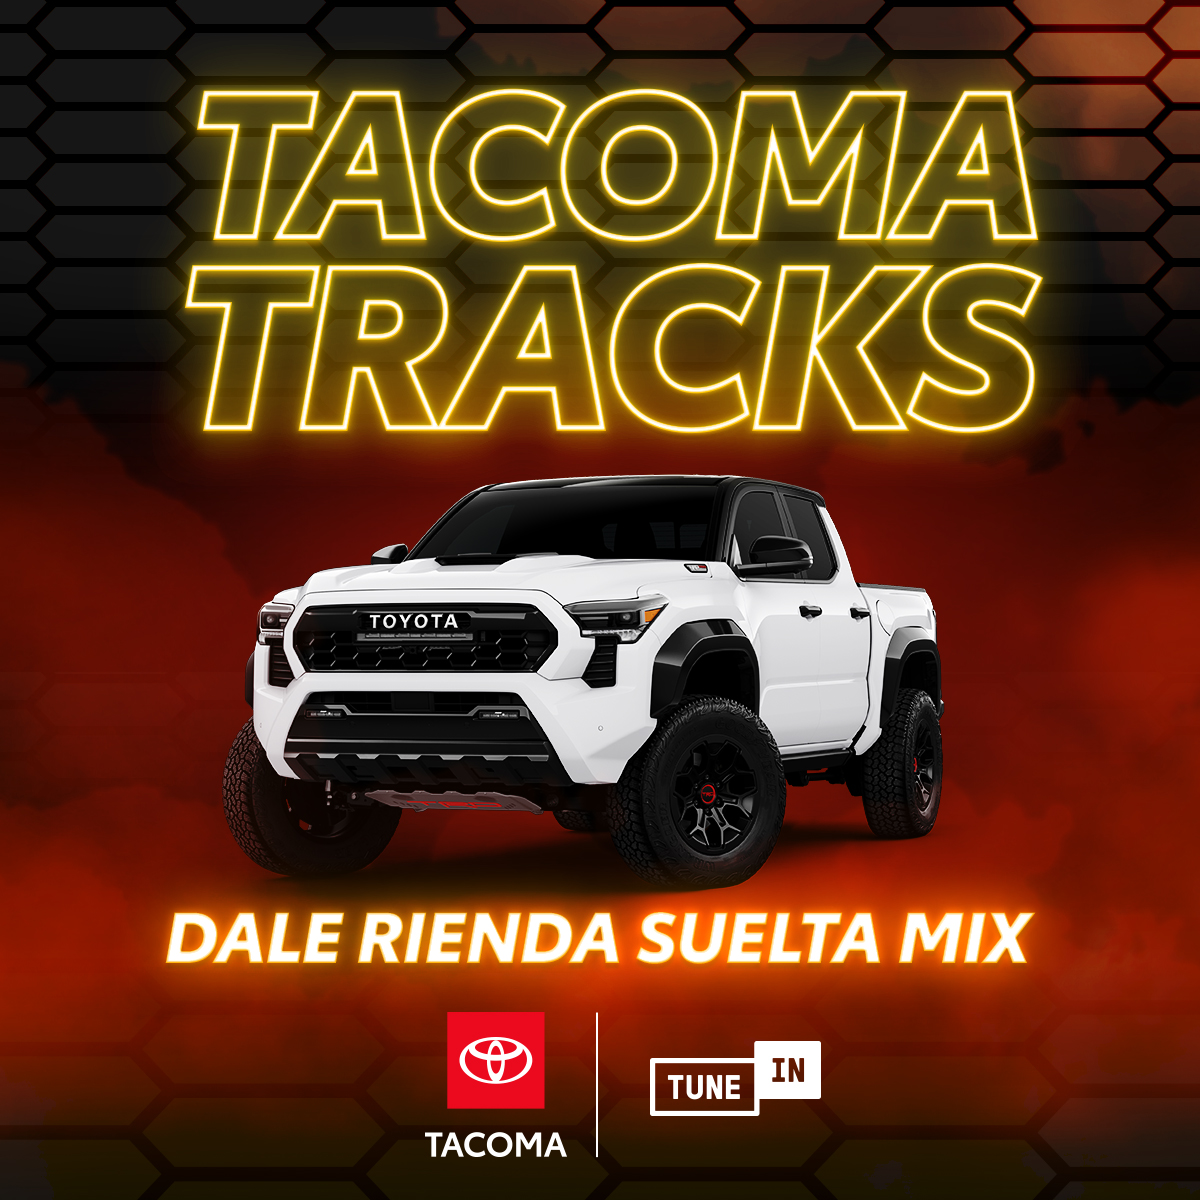 Feeling a bit adventurous? Check out Tacoma Tracks, your soundtrack to everything off-road. Listen to artists like @BadBunnyFiles, @KarolG, & more as you take on the terrain in the all-new 2024 Tacoma. listen.tunein.com/tacomatracks